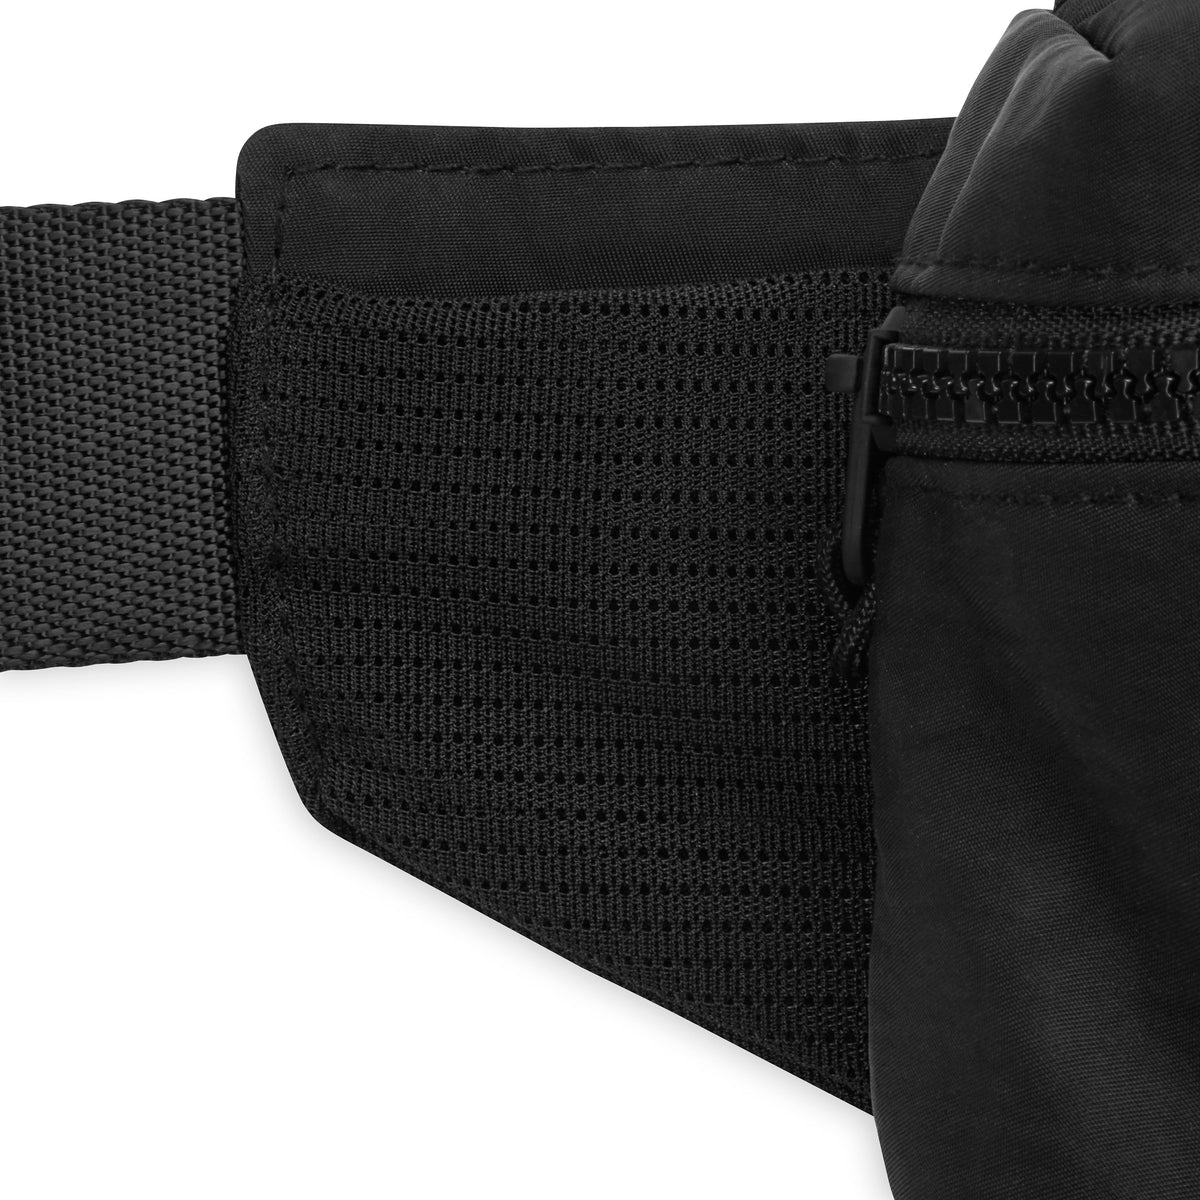 Gaiam Adjustable Running Waist Pack with Large Pocket for Essentials, Black